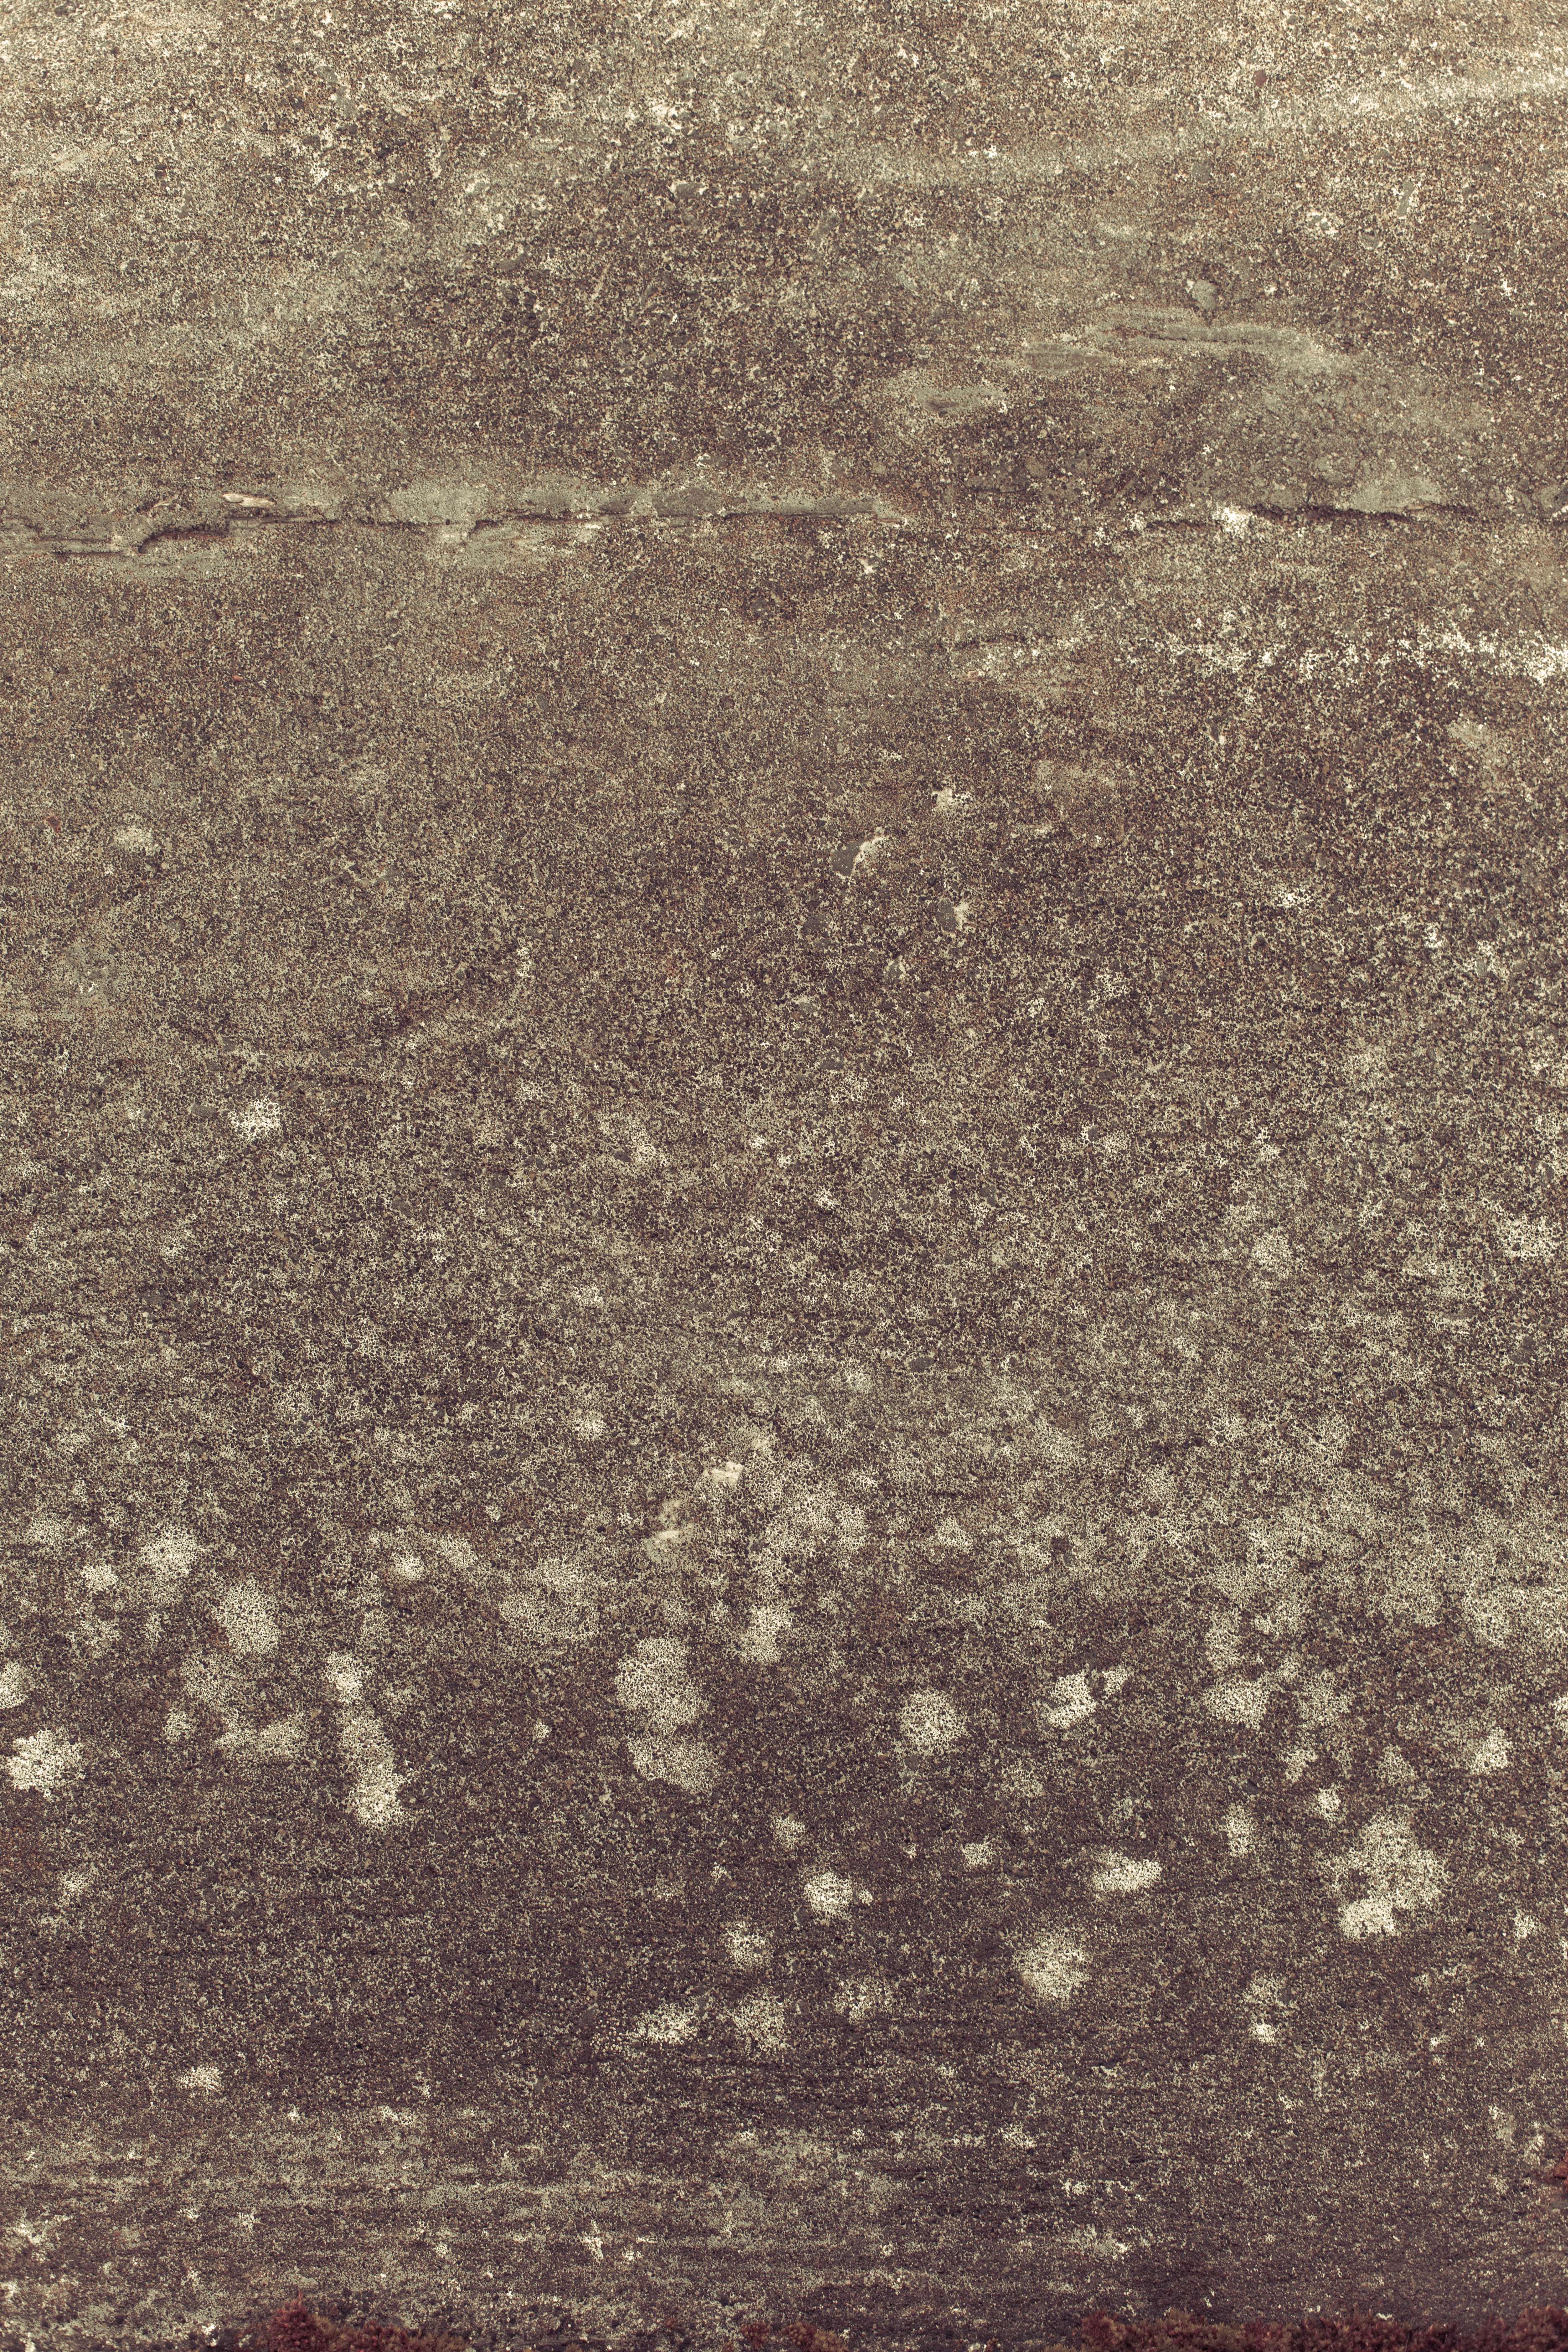 Vintage stained concrete texture photo